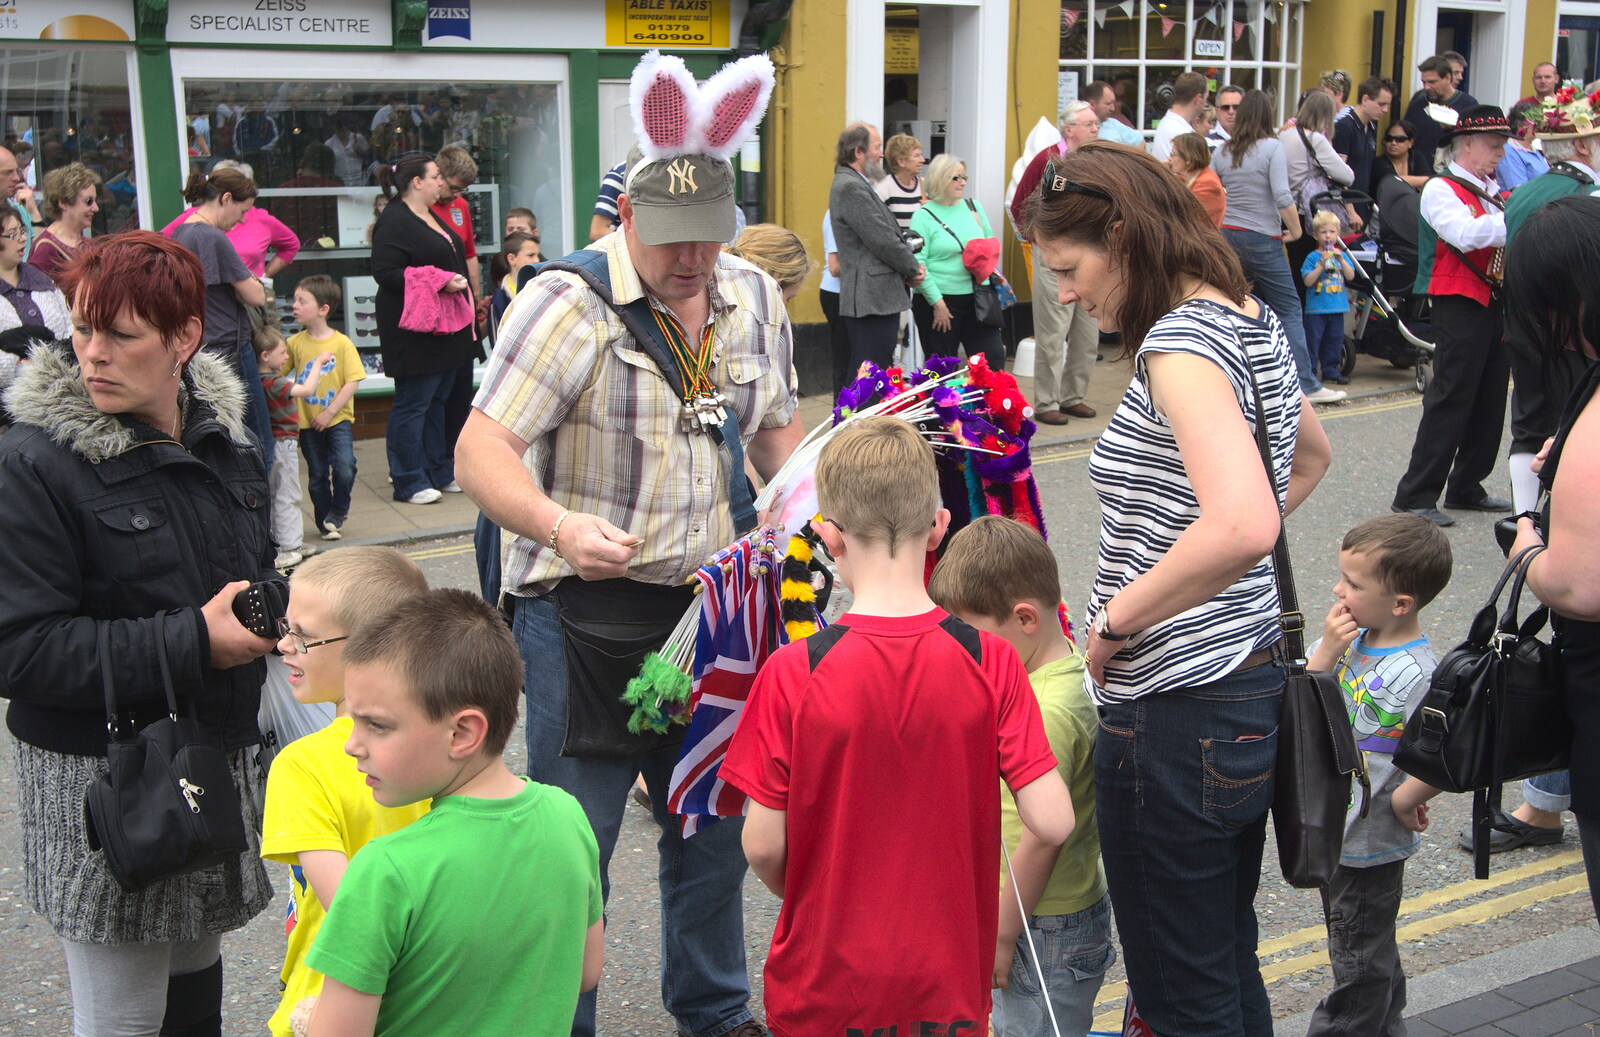 A dude with rabbit ears hands flags out from Morris Dancing and a Carnival Procession, Diss, Norfolk - 17th June 2012